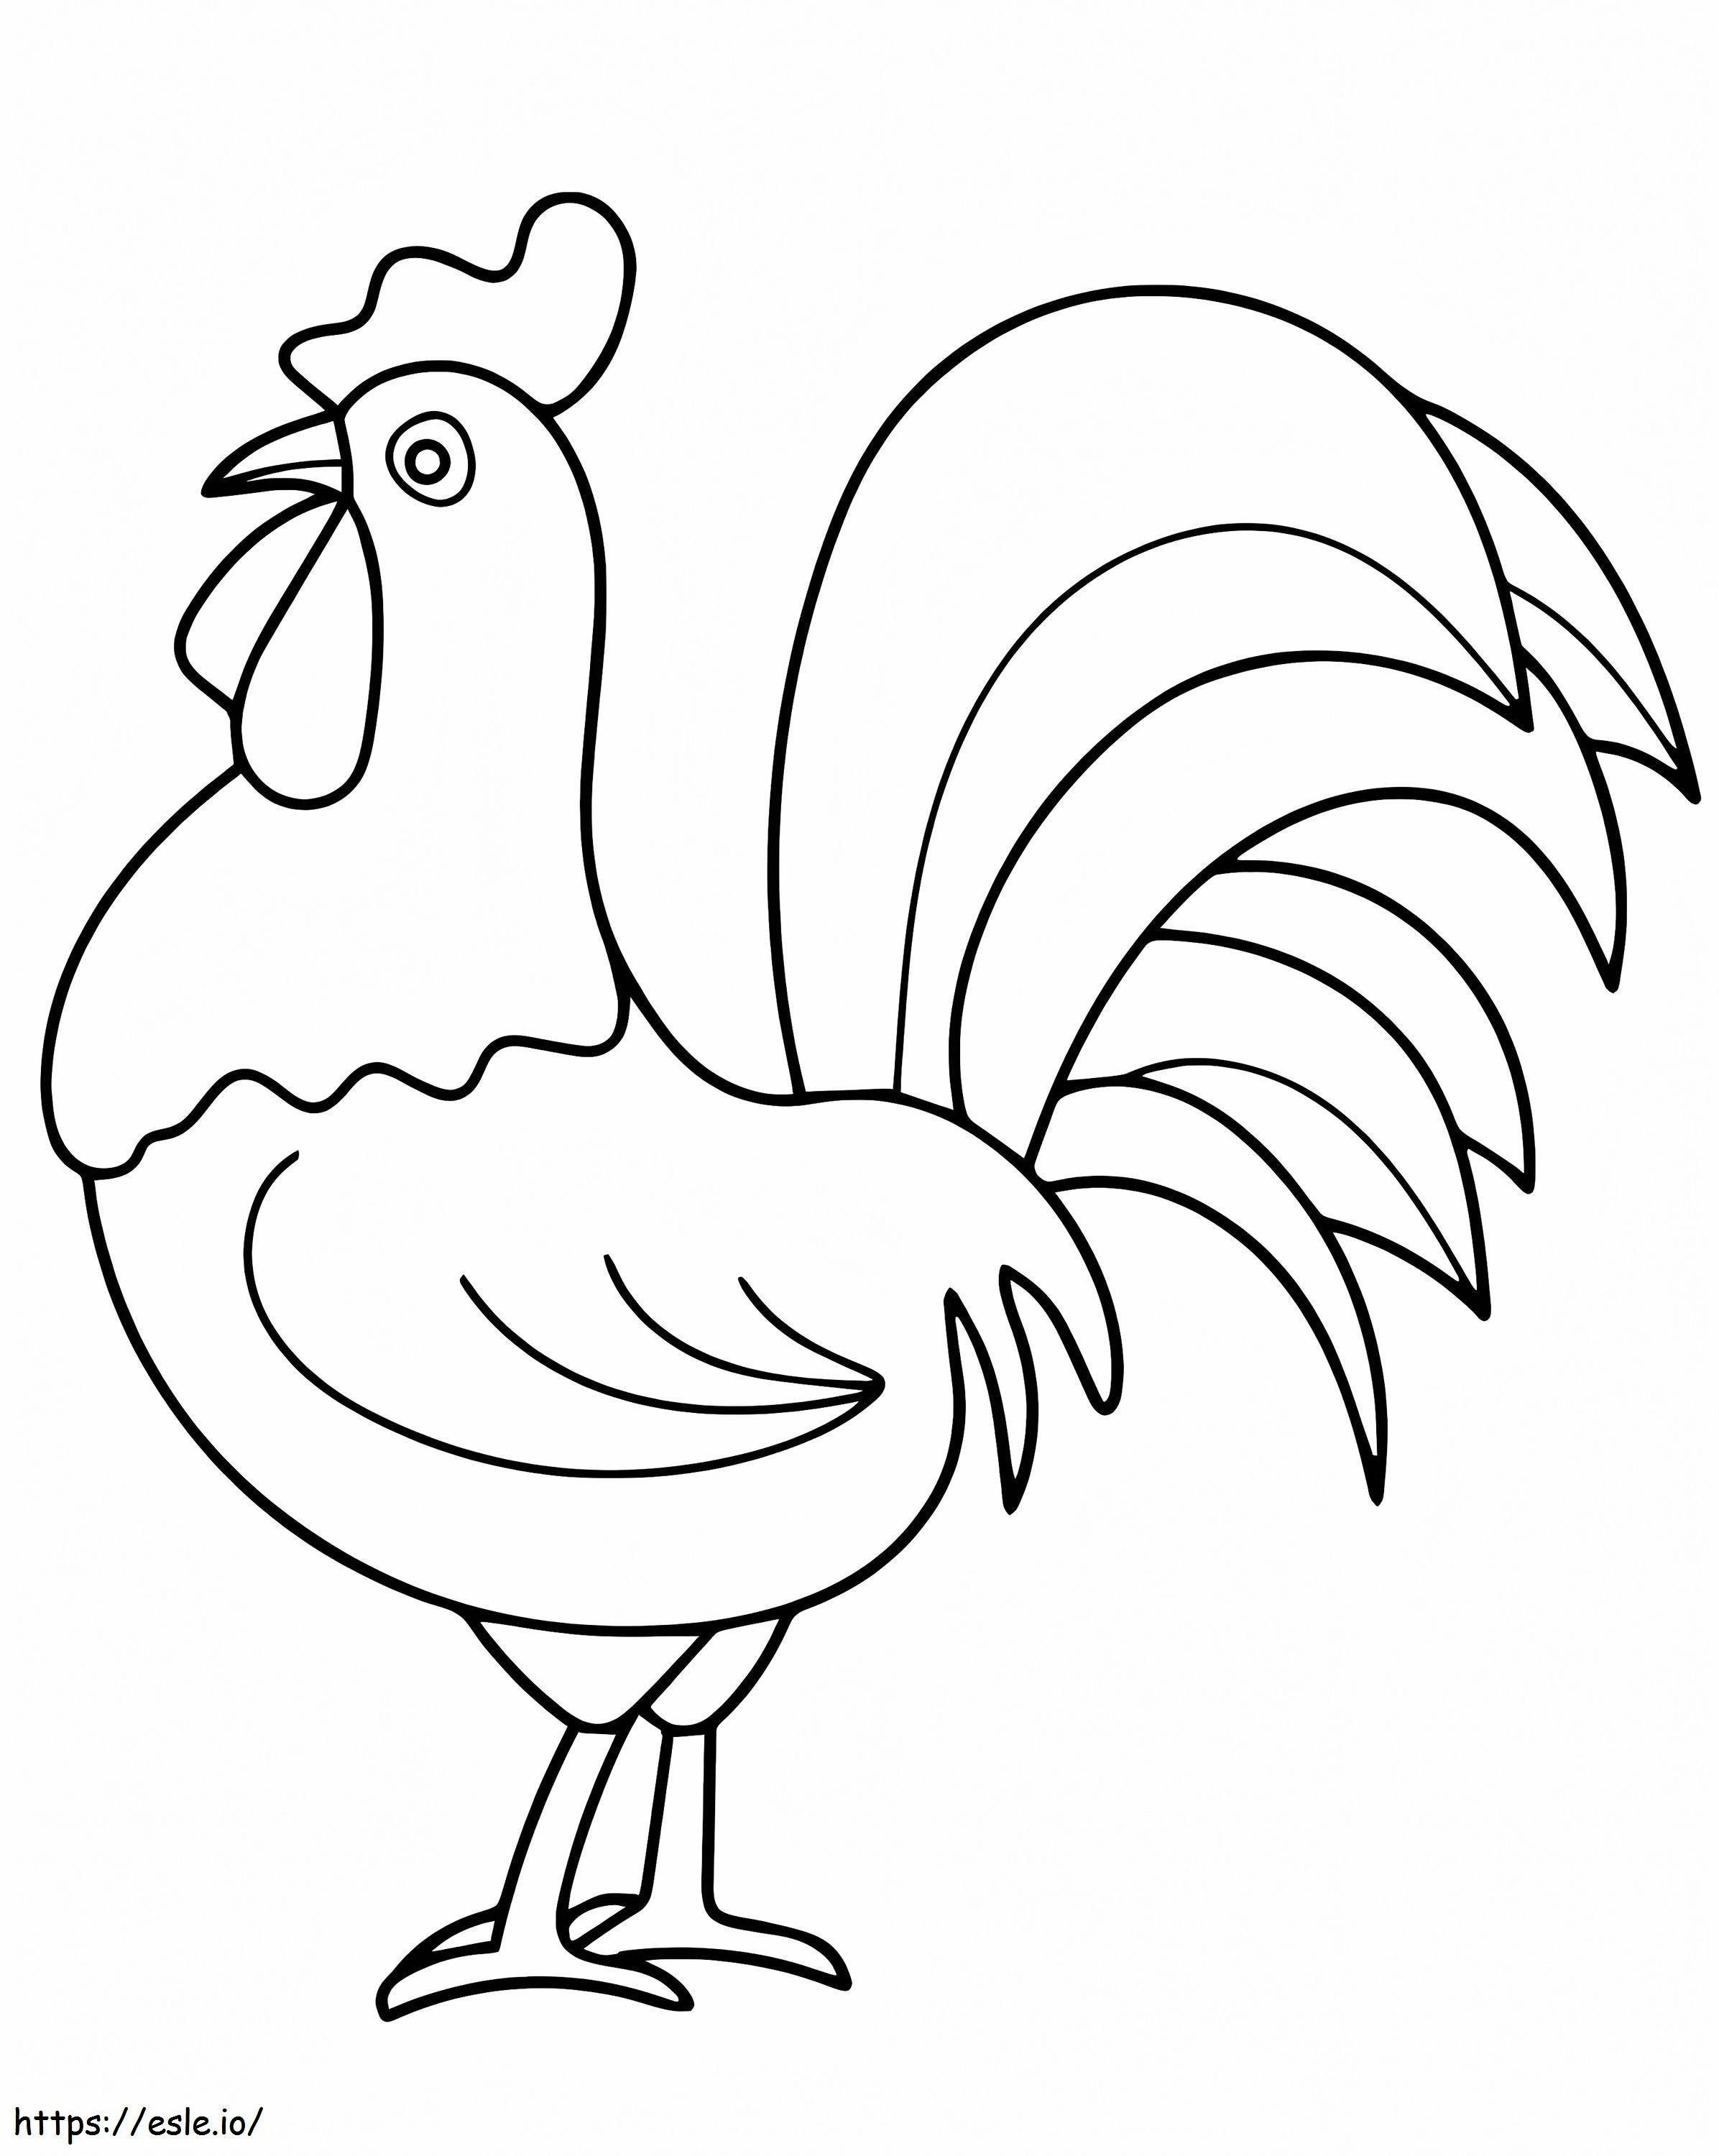 Rooster 3 coloring page